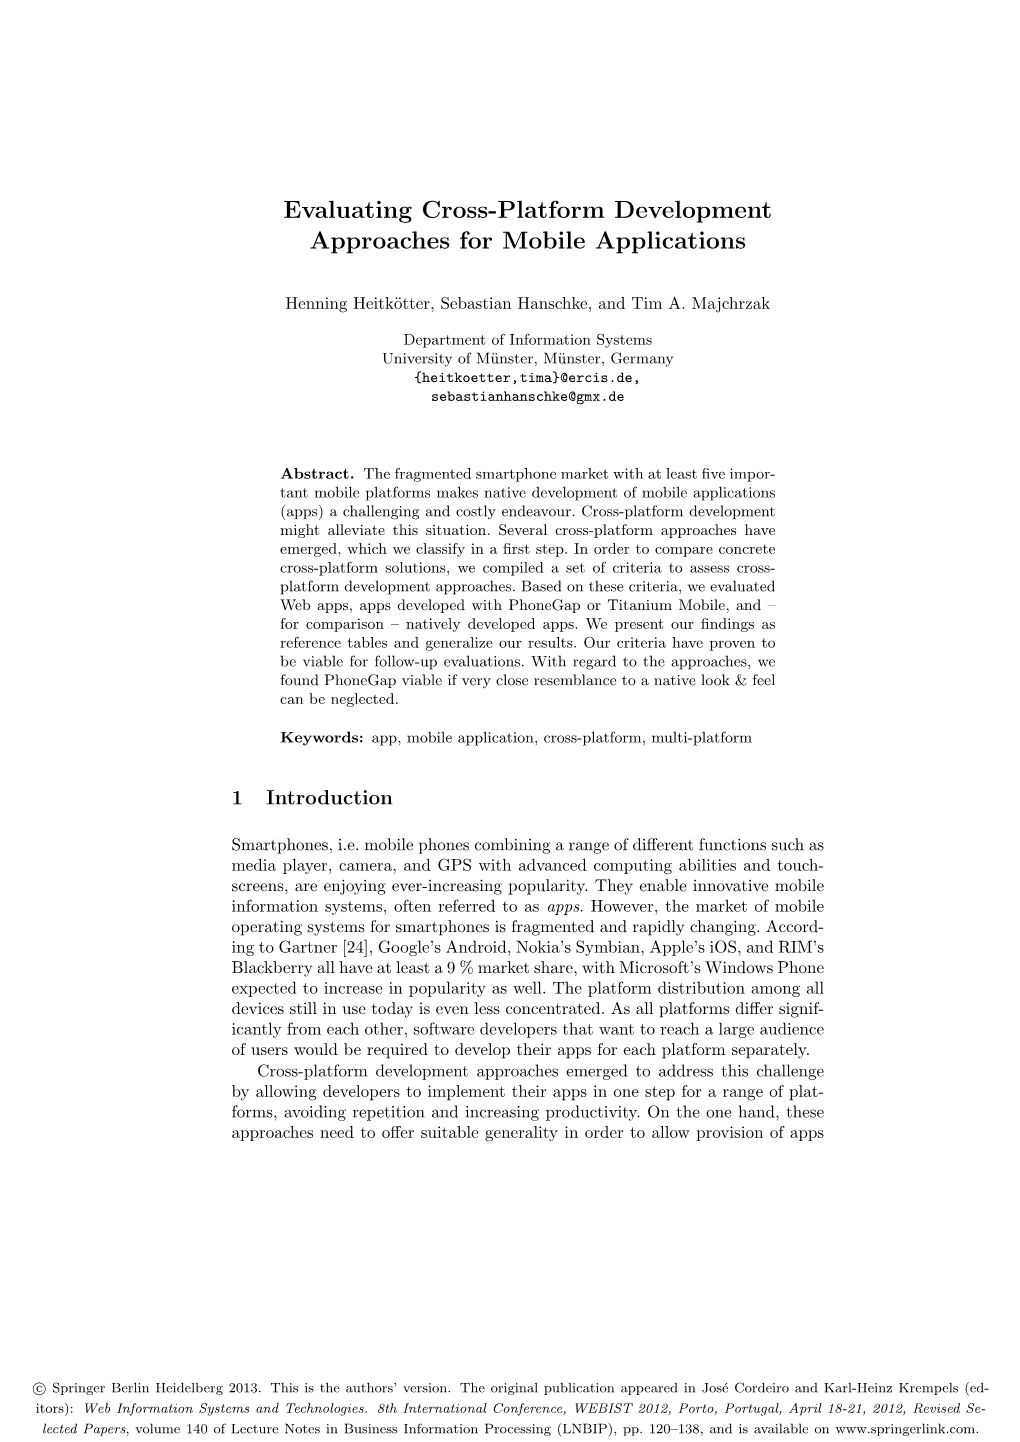 Evaluating Cross-Platform Development Approaches for Mobile Applications